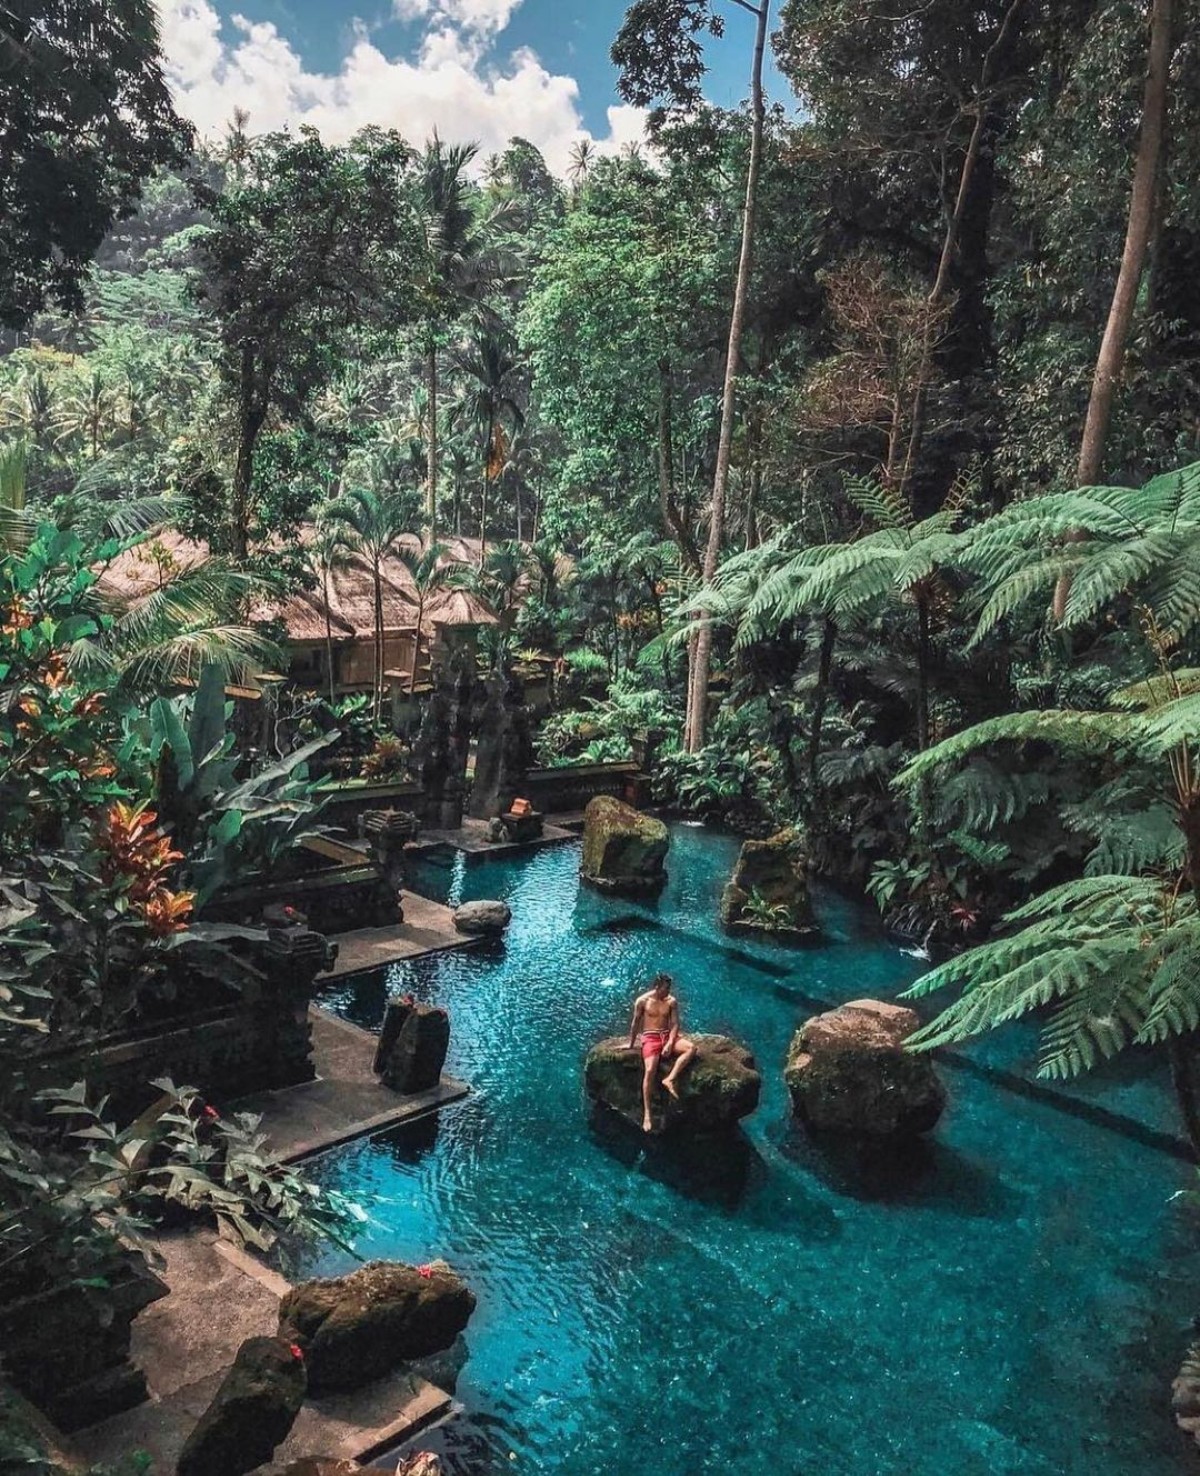 A serene pool nestled amidst dense foliage, with an individual perched on a stone, lost in the surrounding beauty of Ubud, Bali.